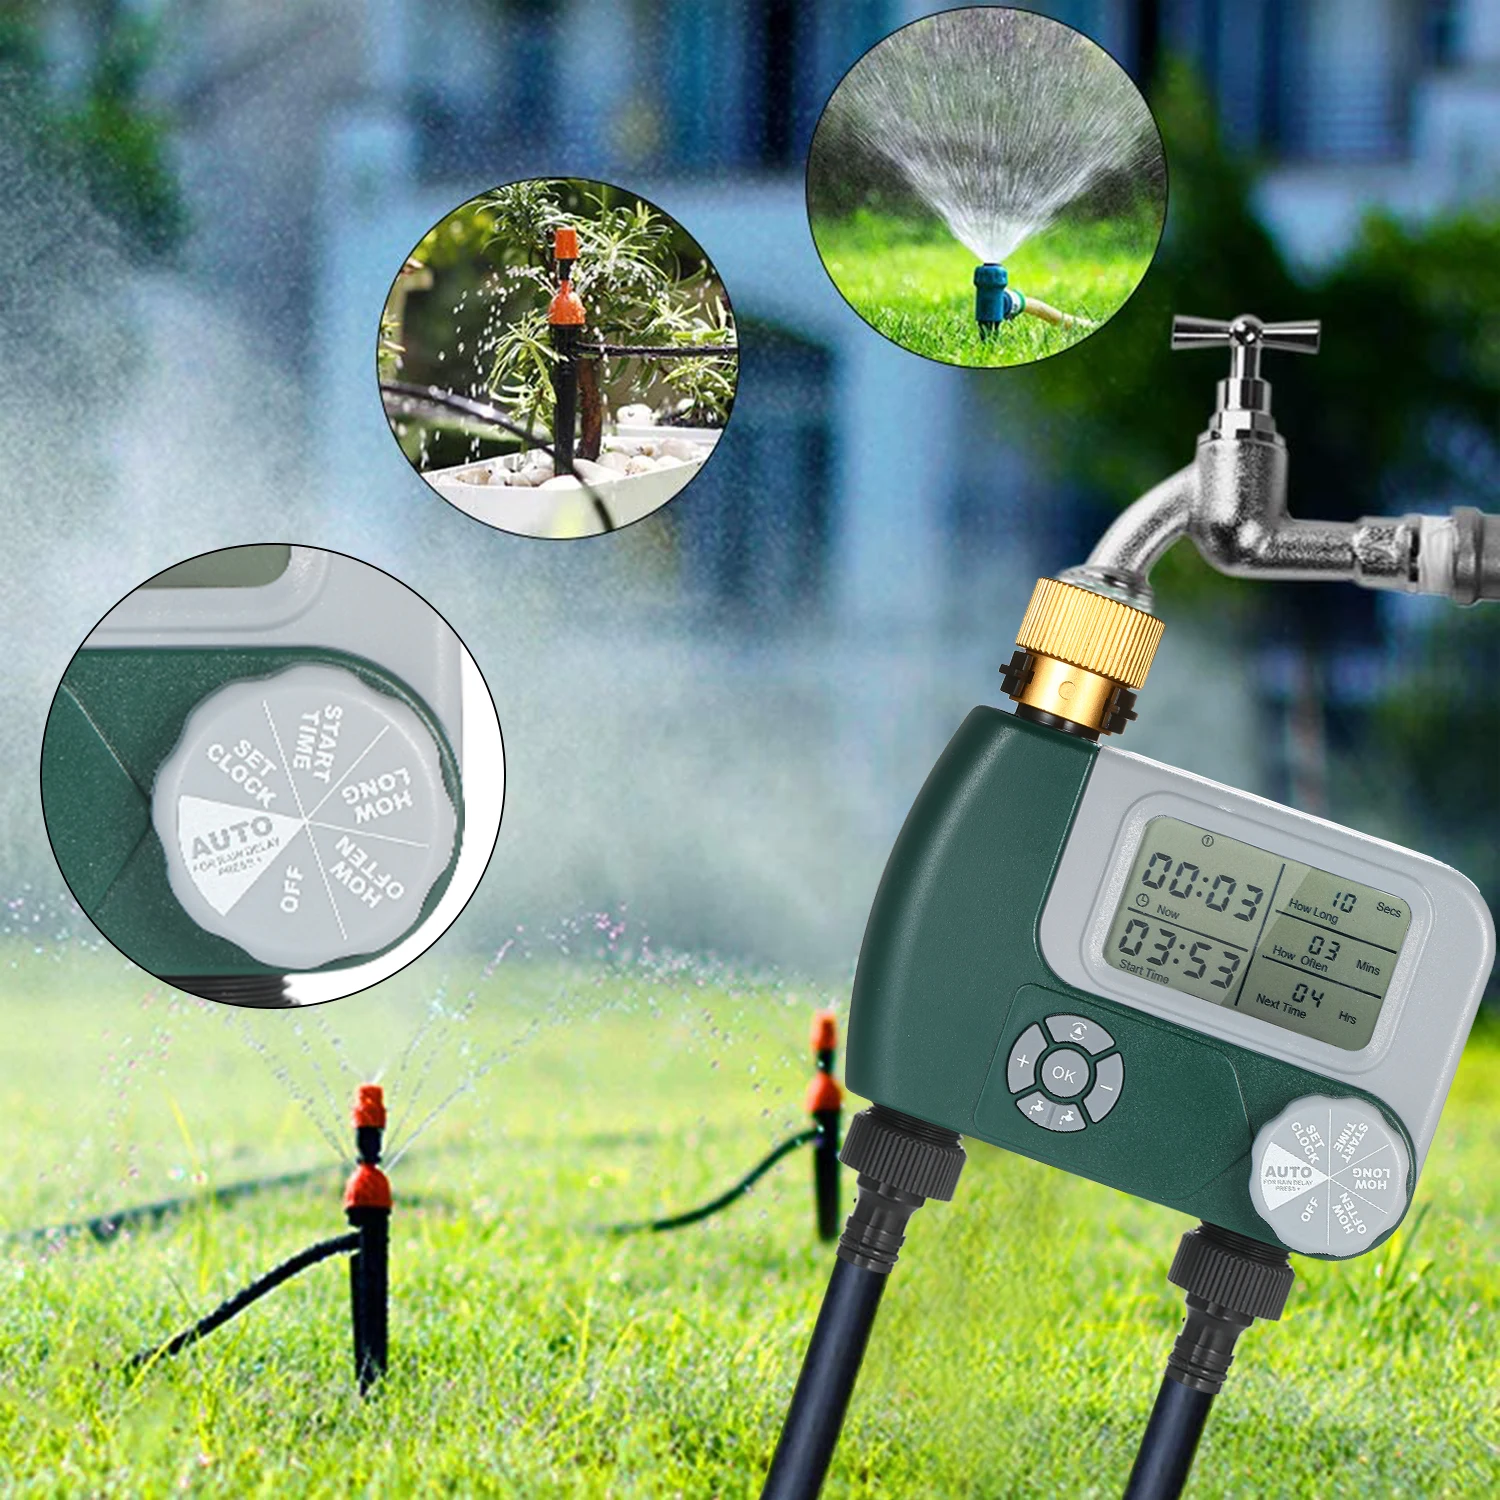 

Programmable Digital Hose Faucet Timer Battery Operated Automatic Watering Sprinkler System Irrigation Controller with 2 Outlet